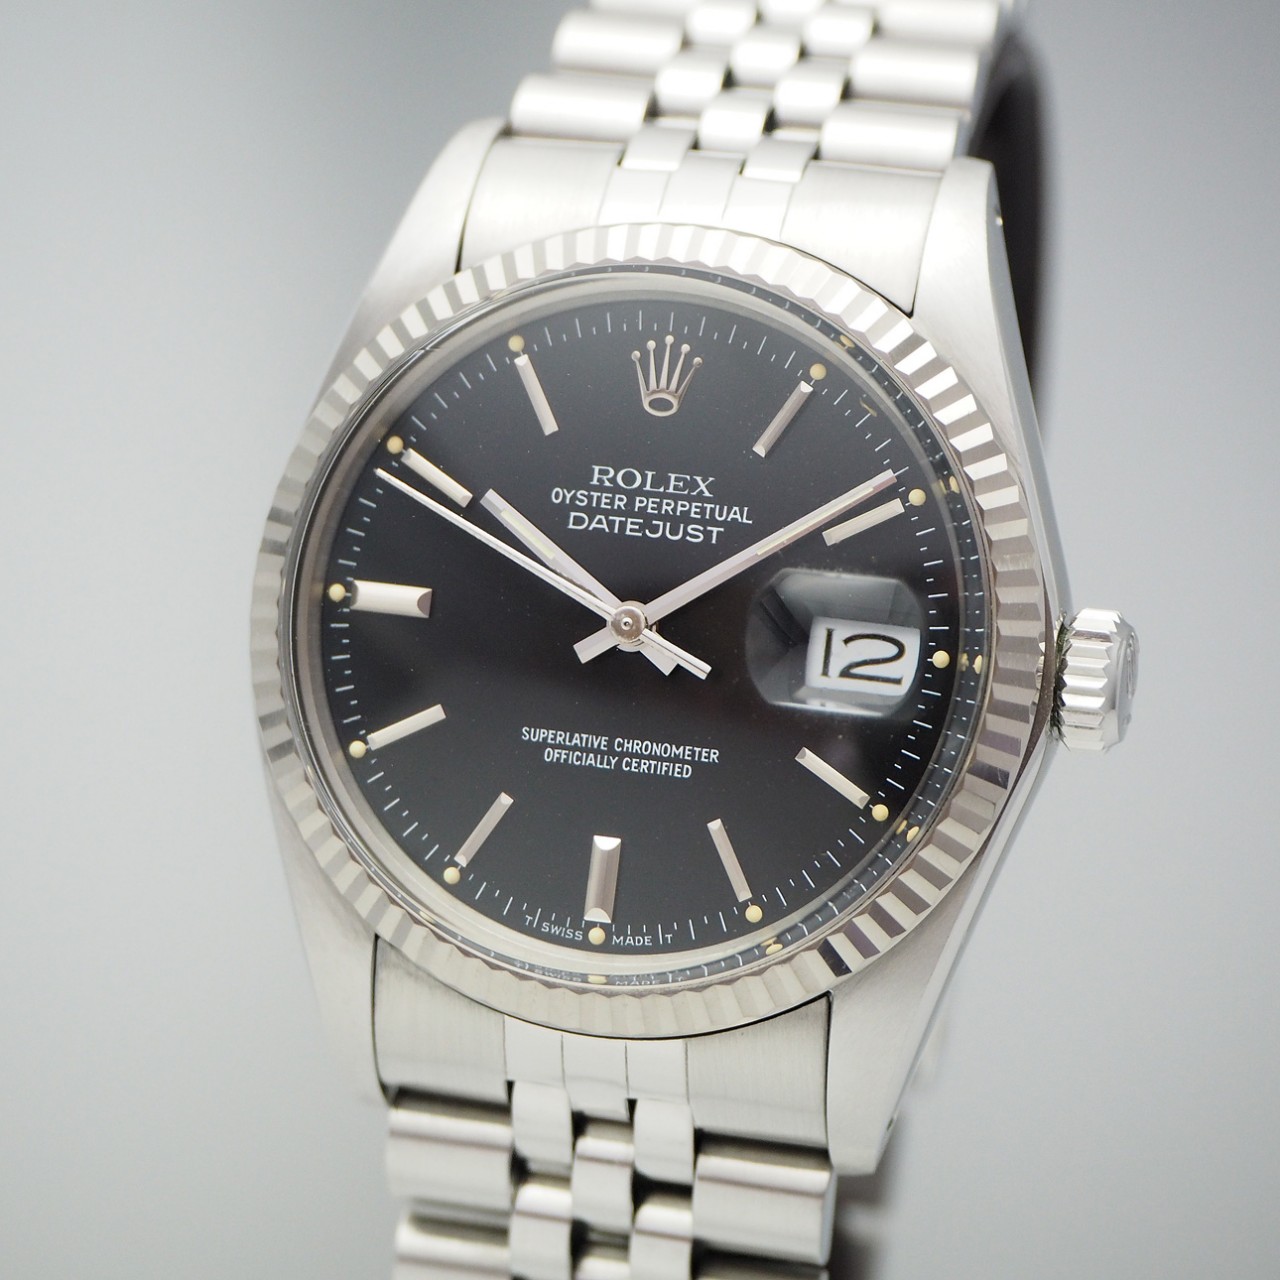 Rolex Datejust 16014 Black dial, Stahl/Stahl, perfect condition!